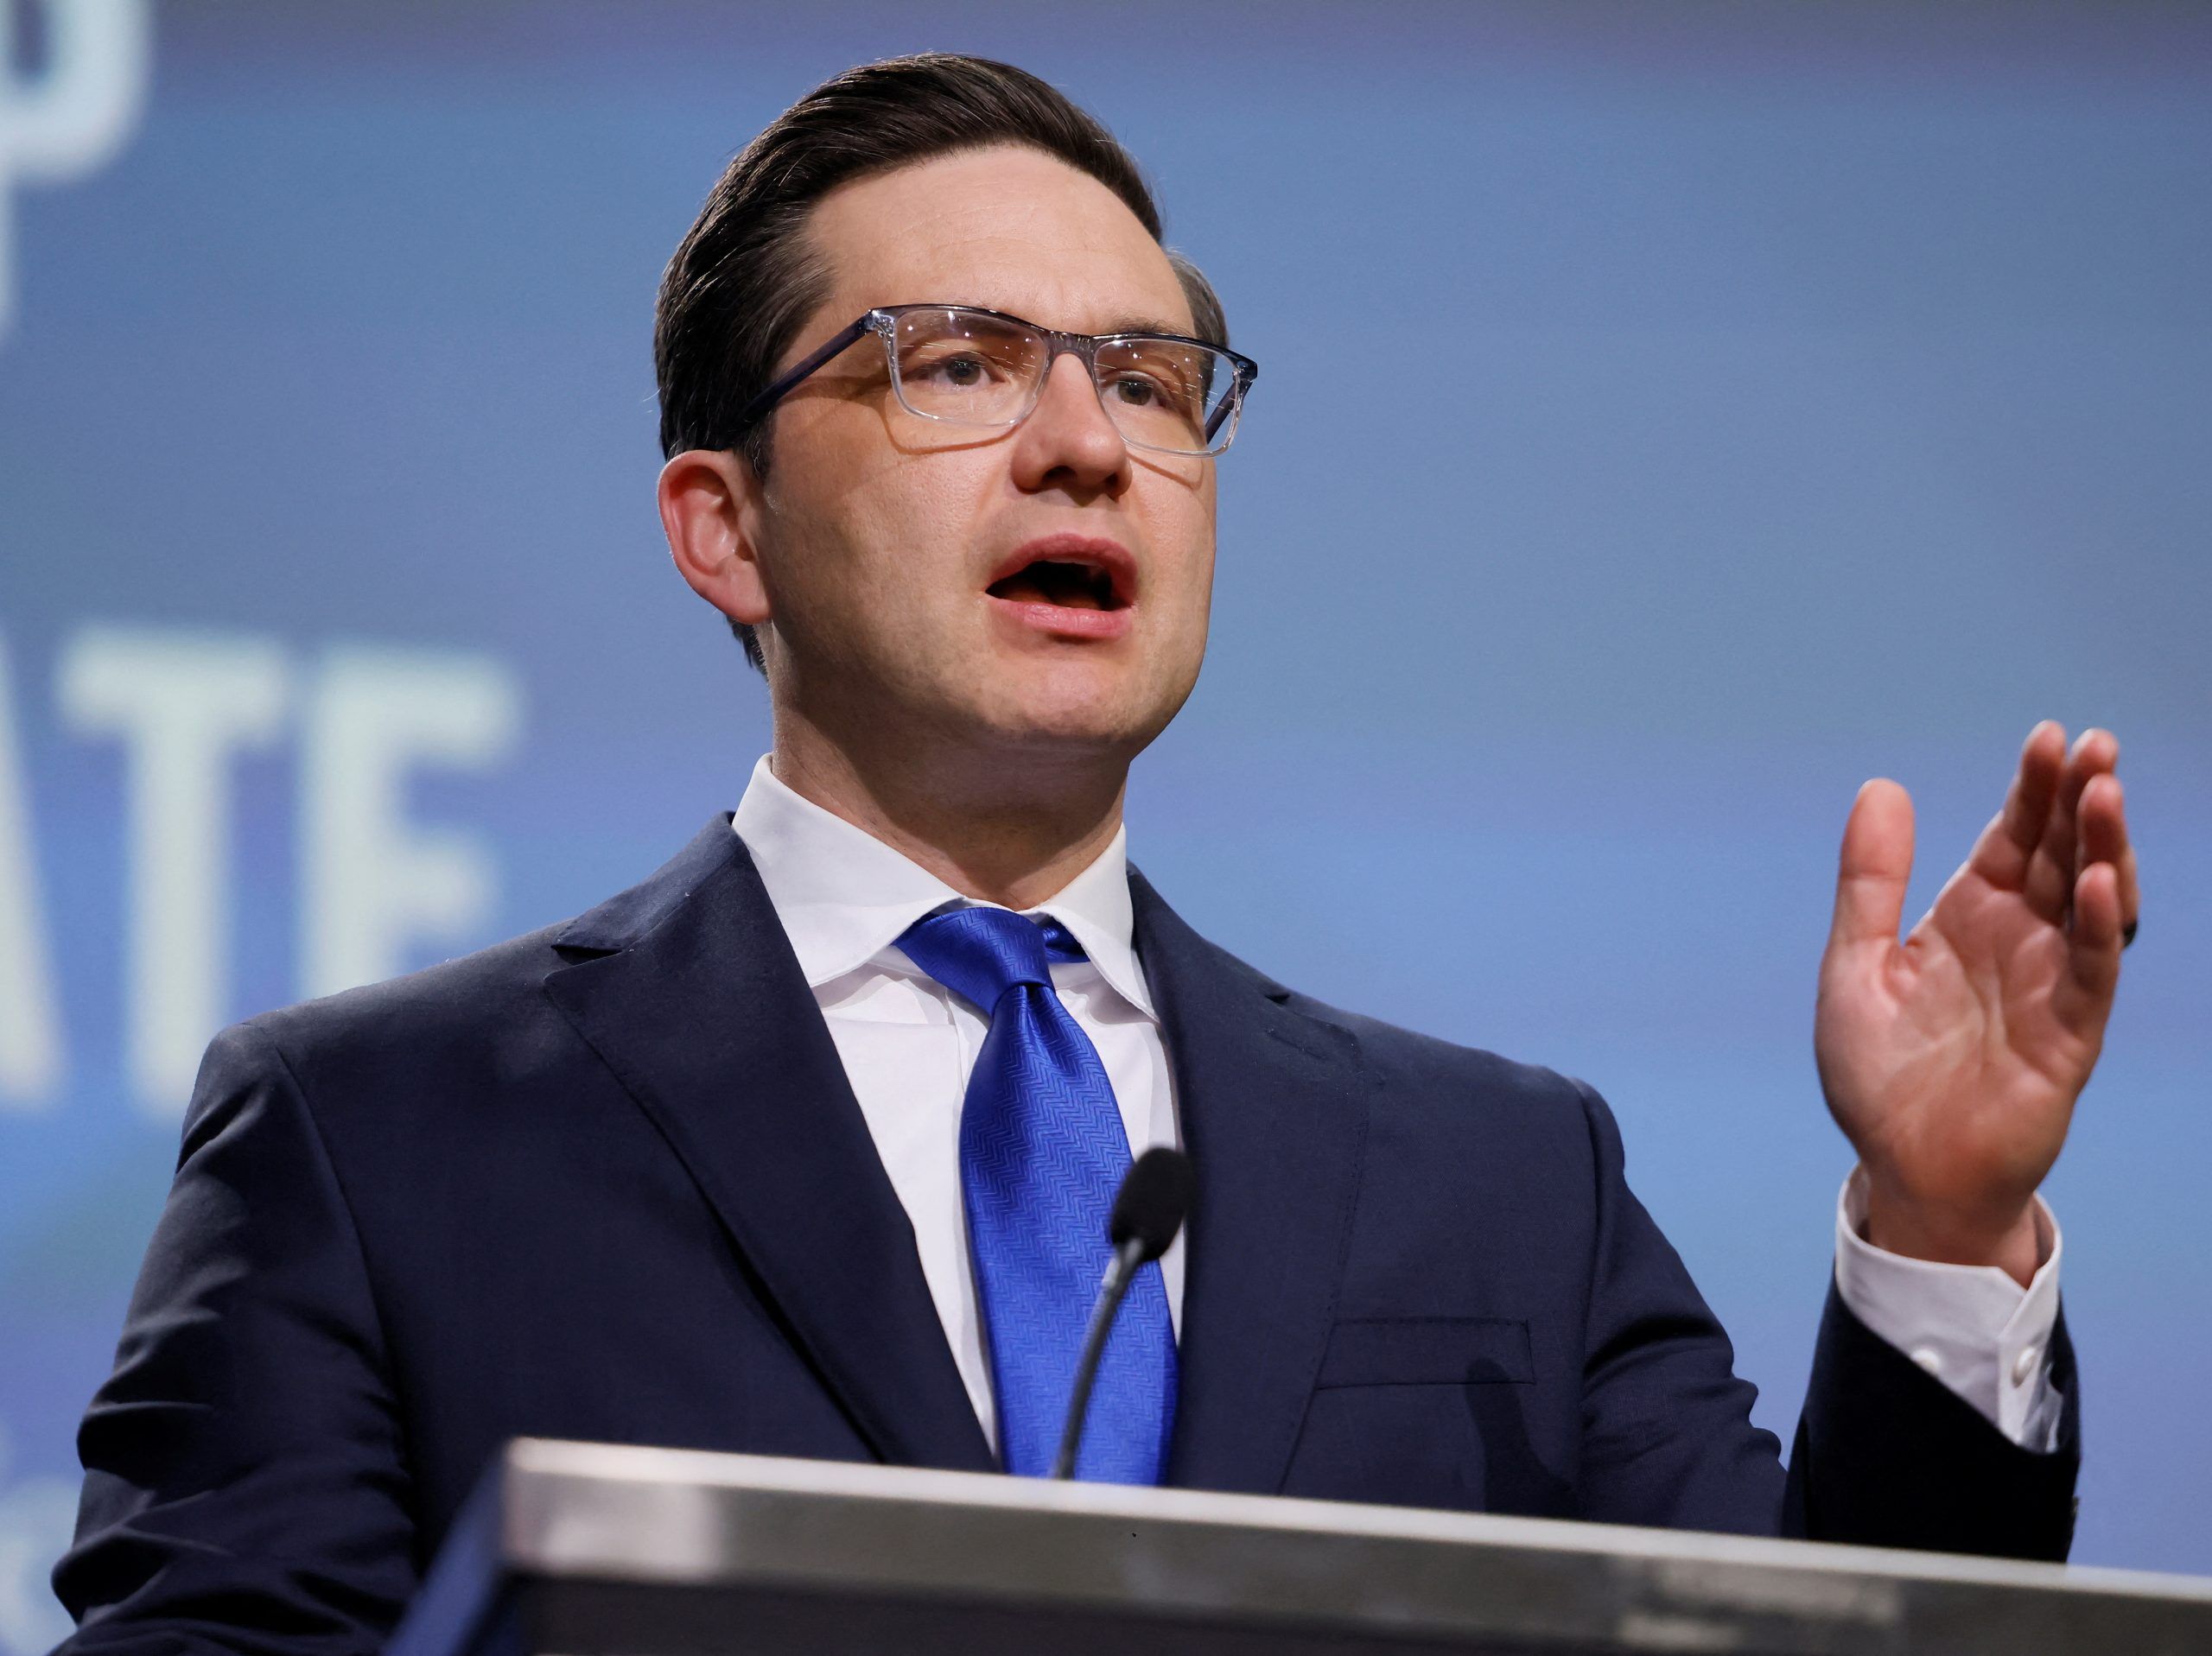 Conrad Black: Poilievre has a real chance to break the Liberal status quo — and that has his enemies trembling